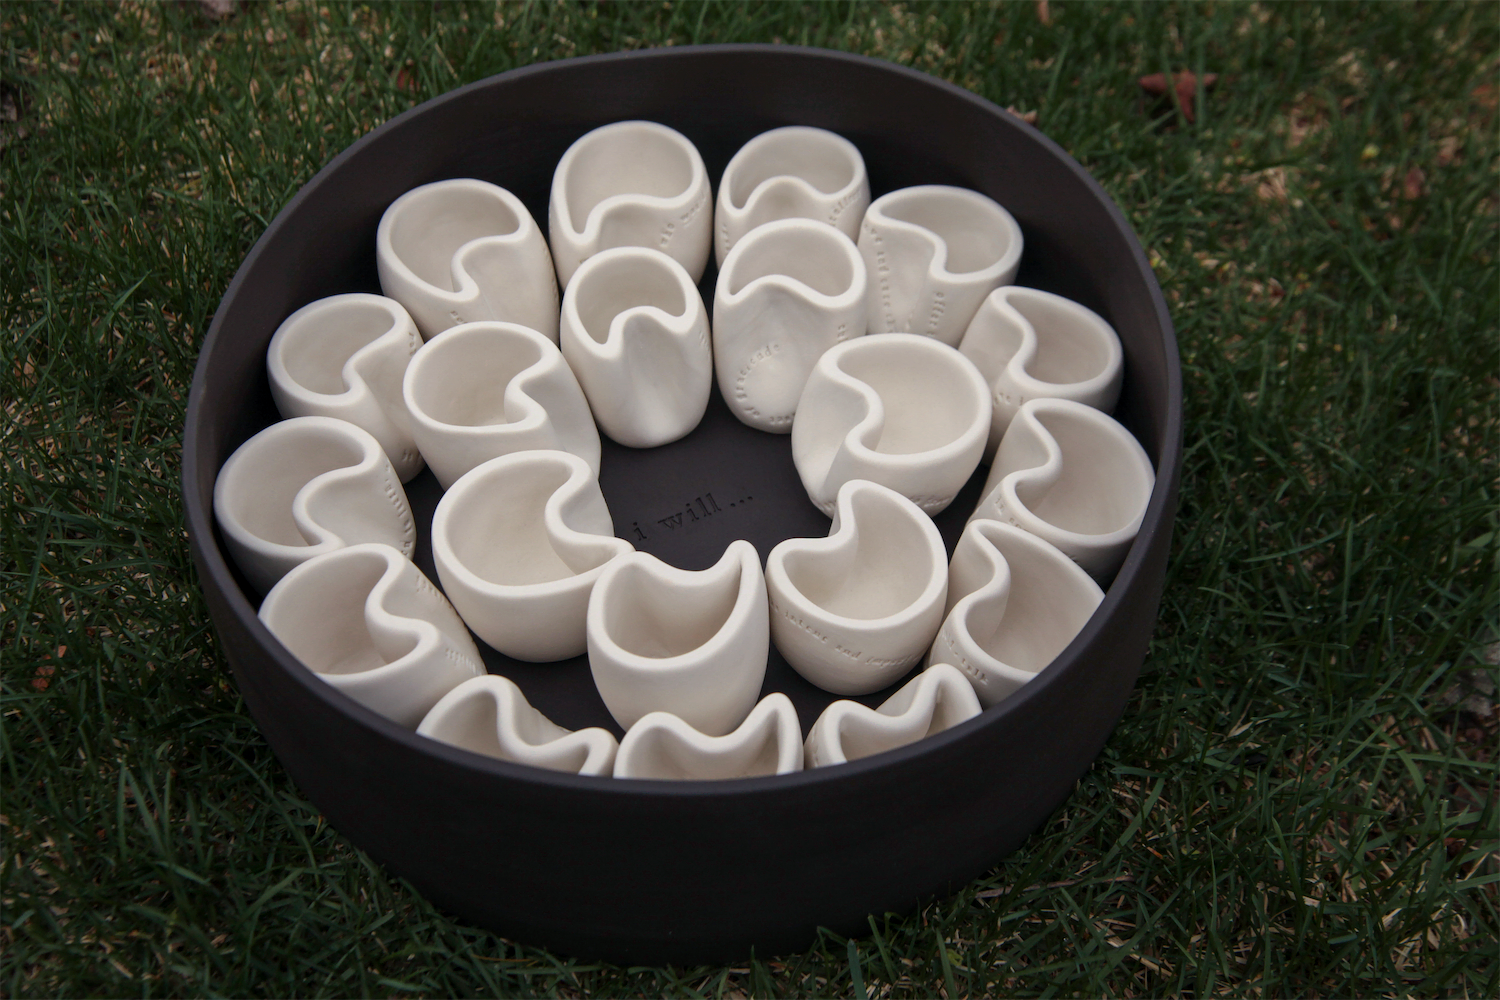 Twenty white porcelain cups in black porcelain carrier.  The cups are centered around the phrase “I will…” that is stamped onto the center of the carrier.